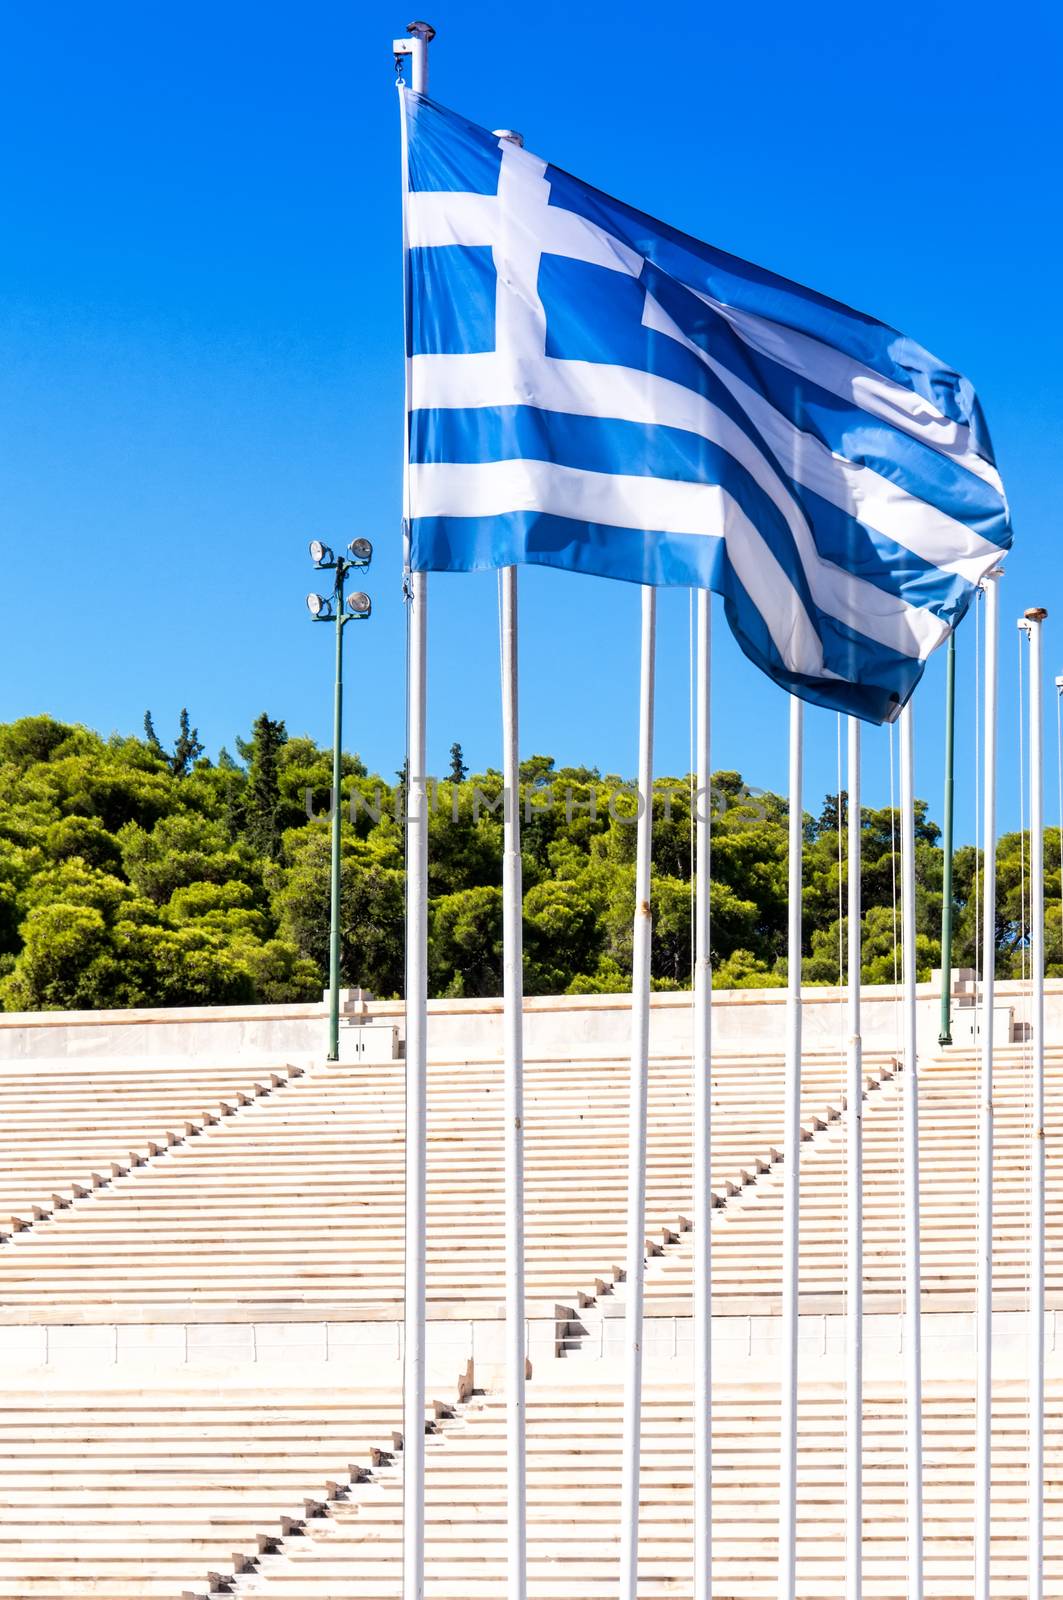 The Panathenaic Stadium hosted the first modern Olympic Games in 1896, Athens.